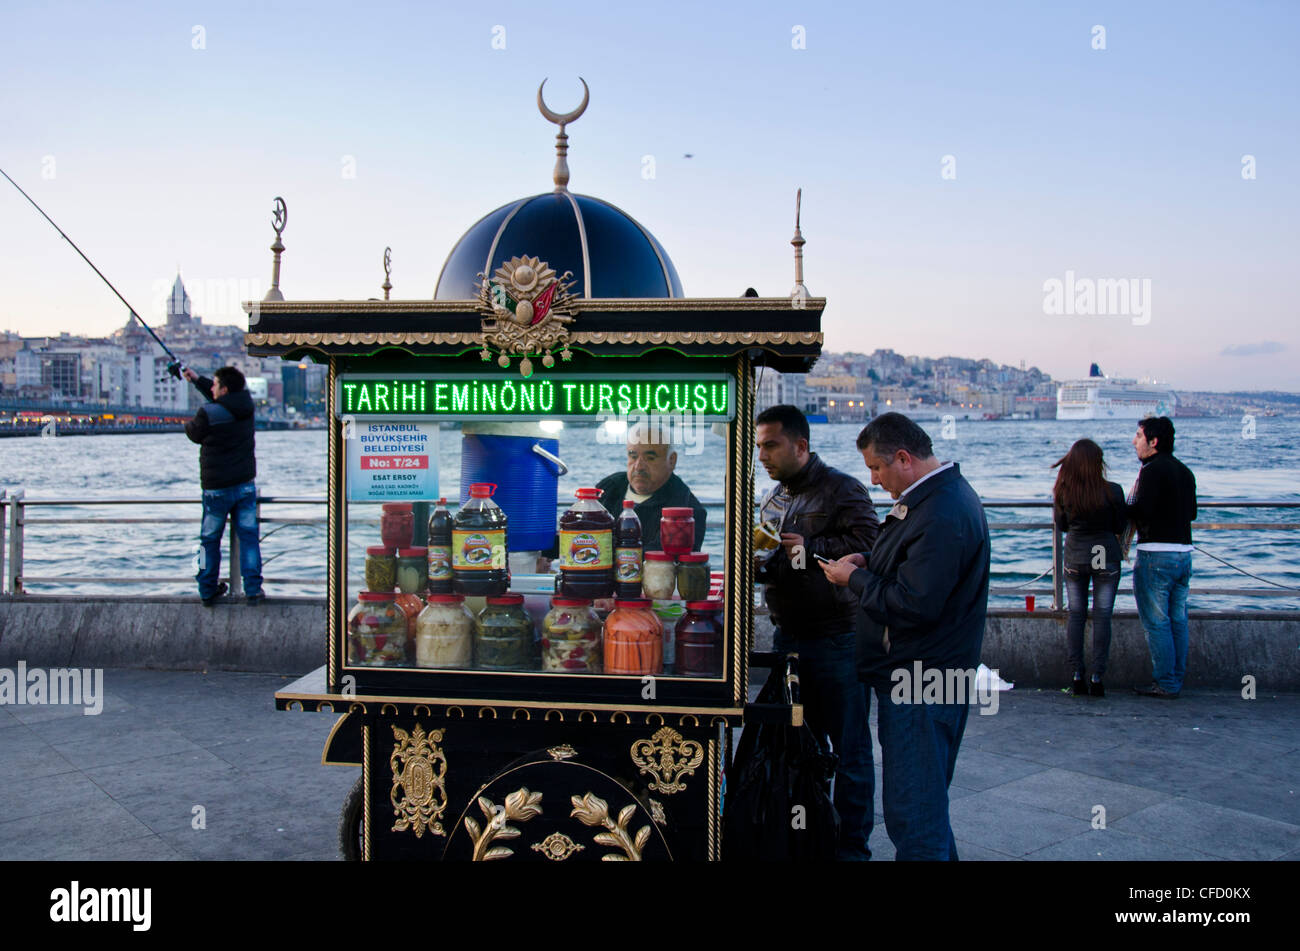 Food kiosk on the Golden Horn by the Galata Bridge, located in the Eminönü district of Istanbul, Turkey. Stock Photo